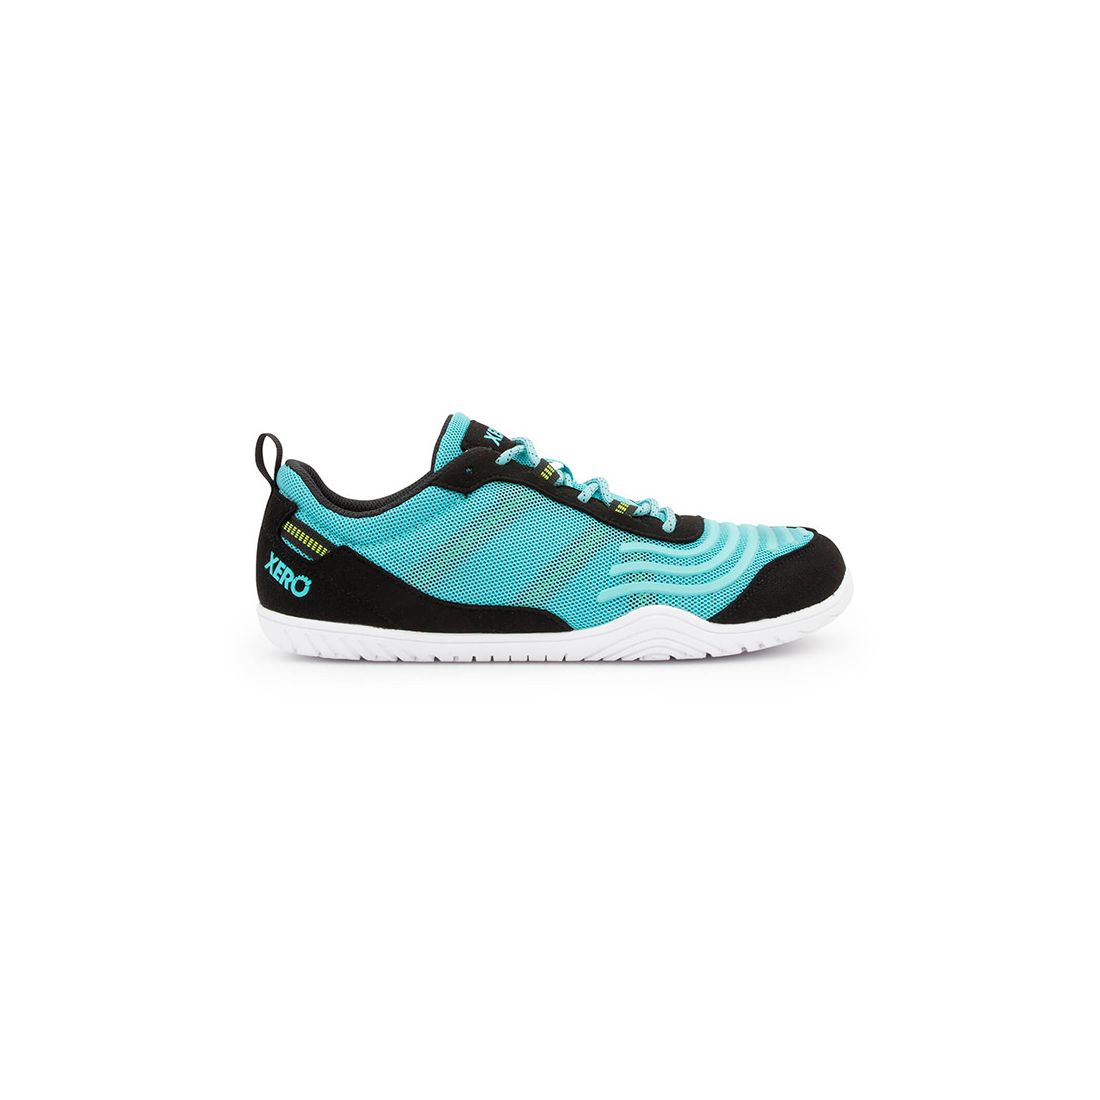 Xero Shoes 360 Women: Minimalist shoes for on road and light trail